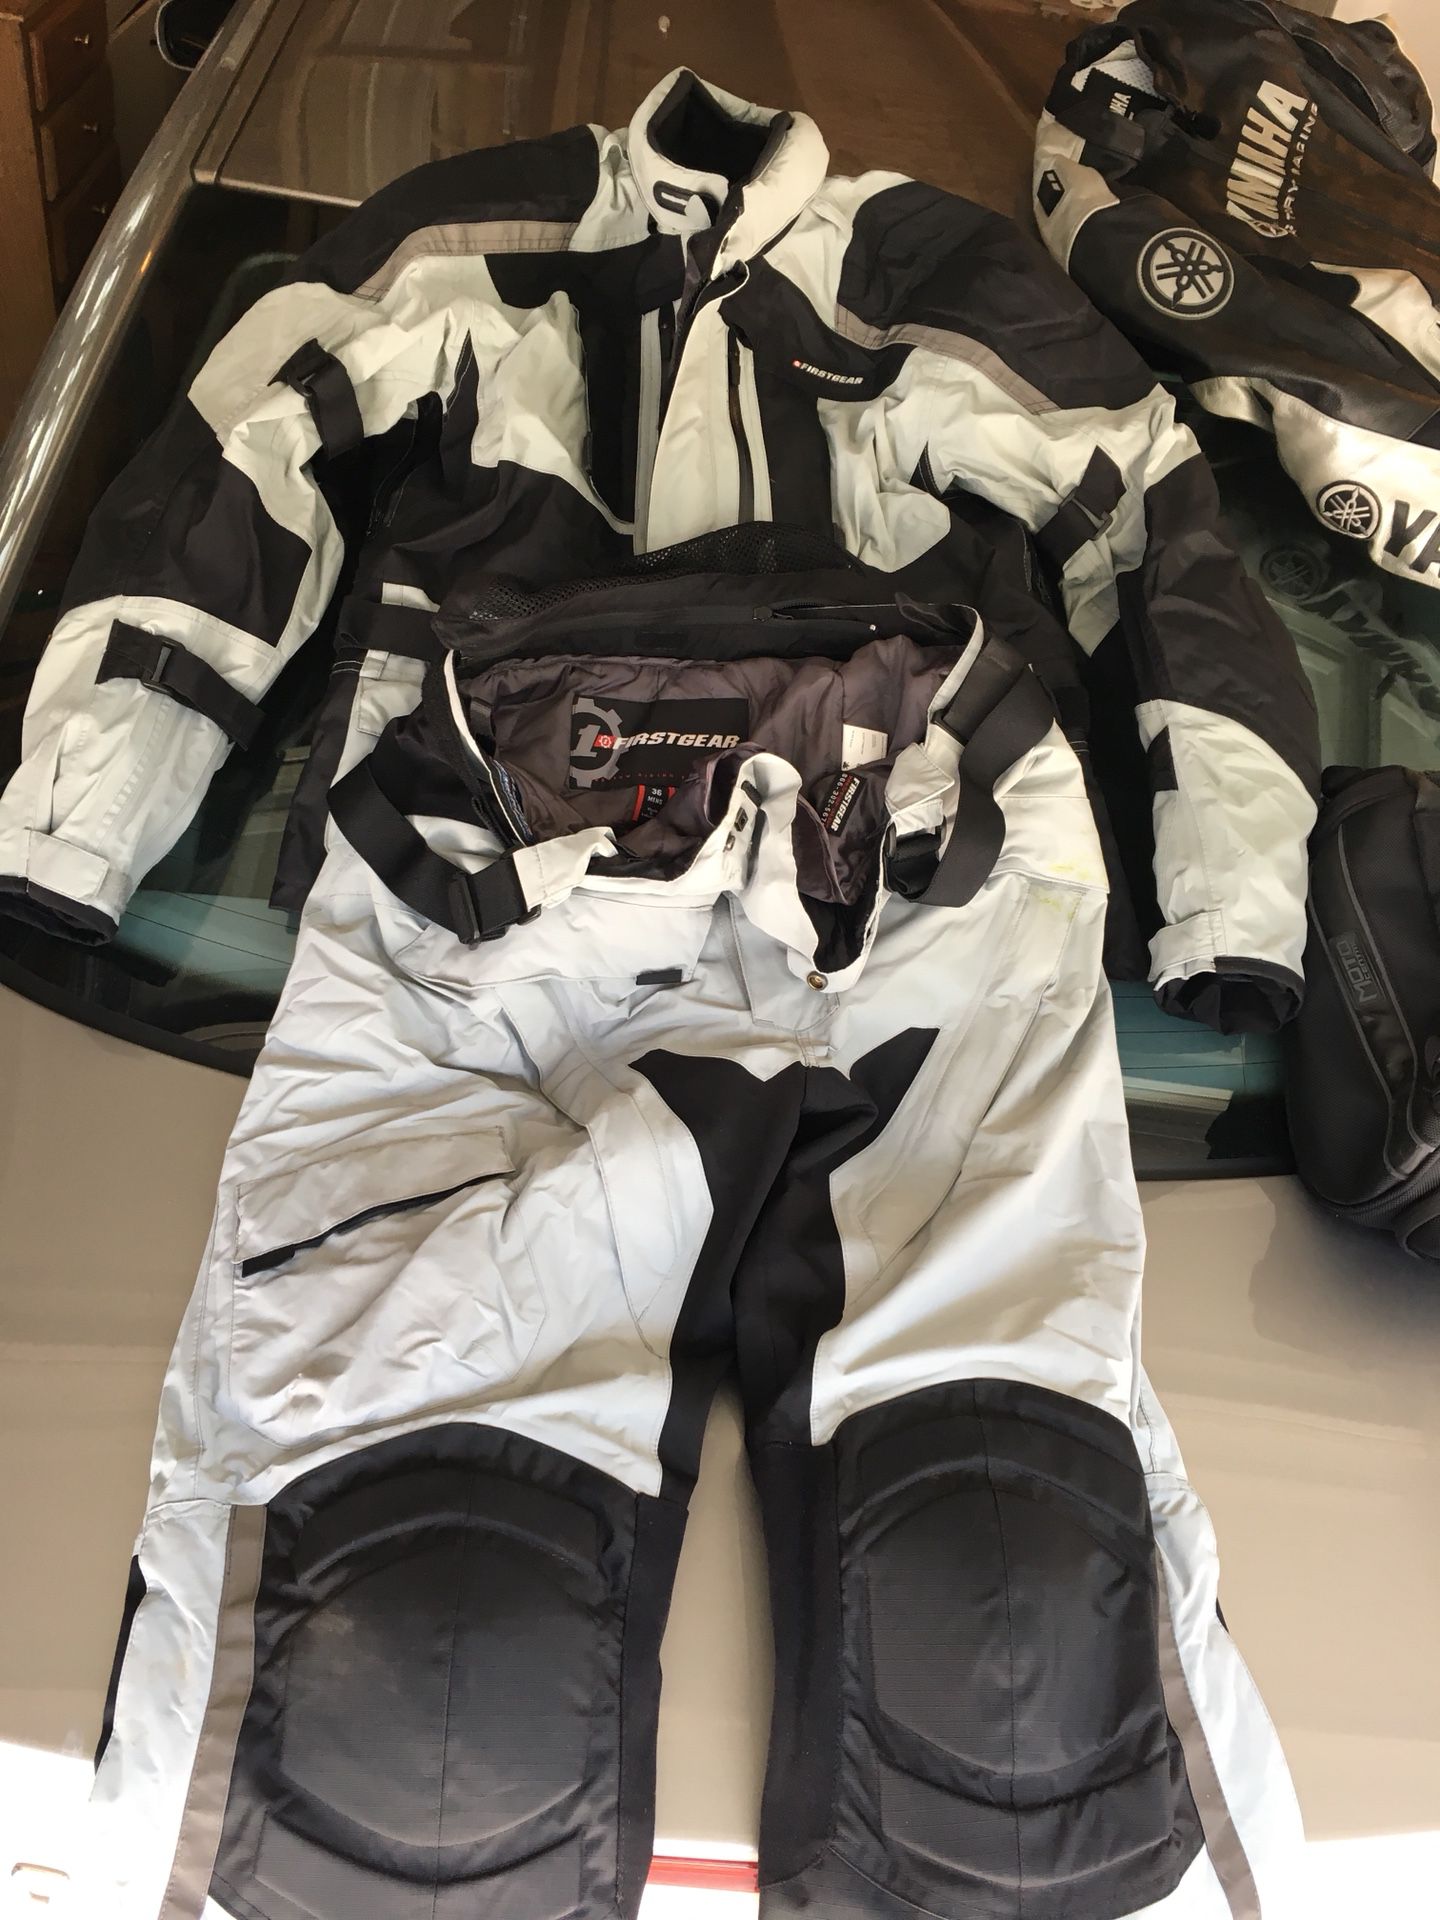 First gear motorcycle suit